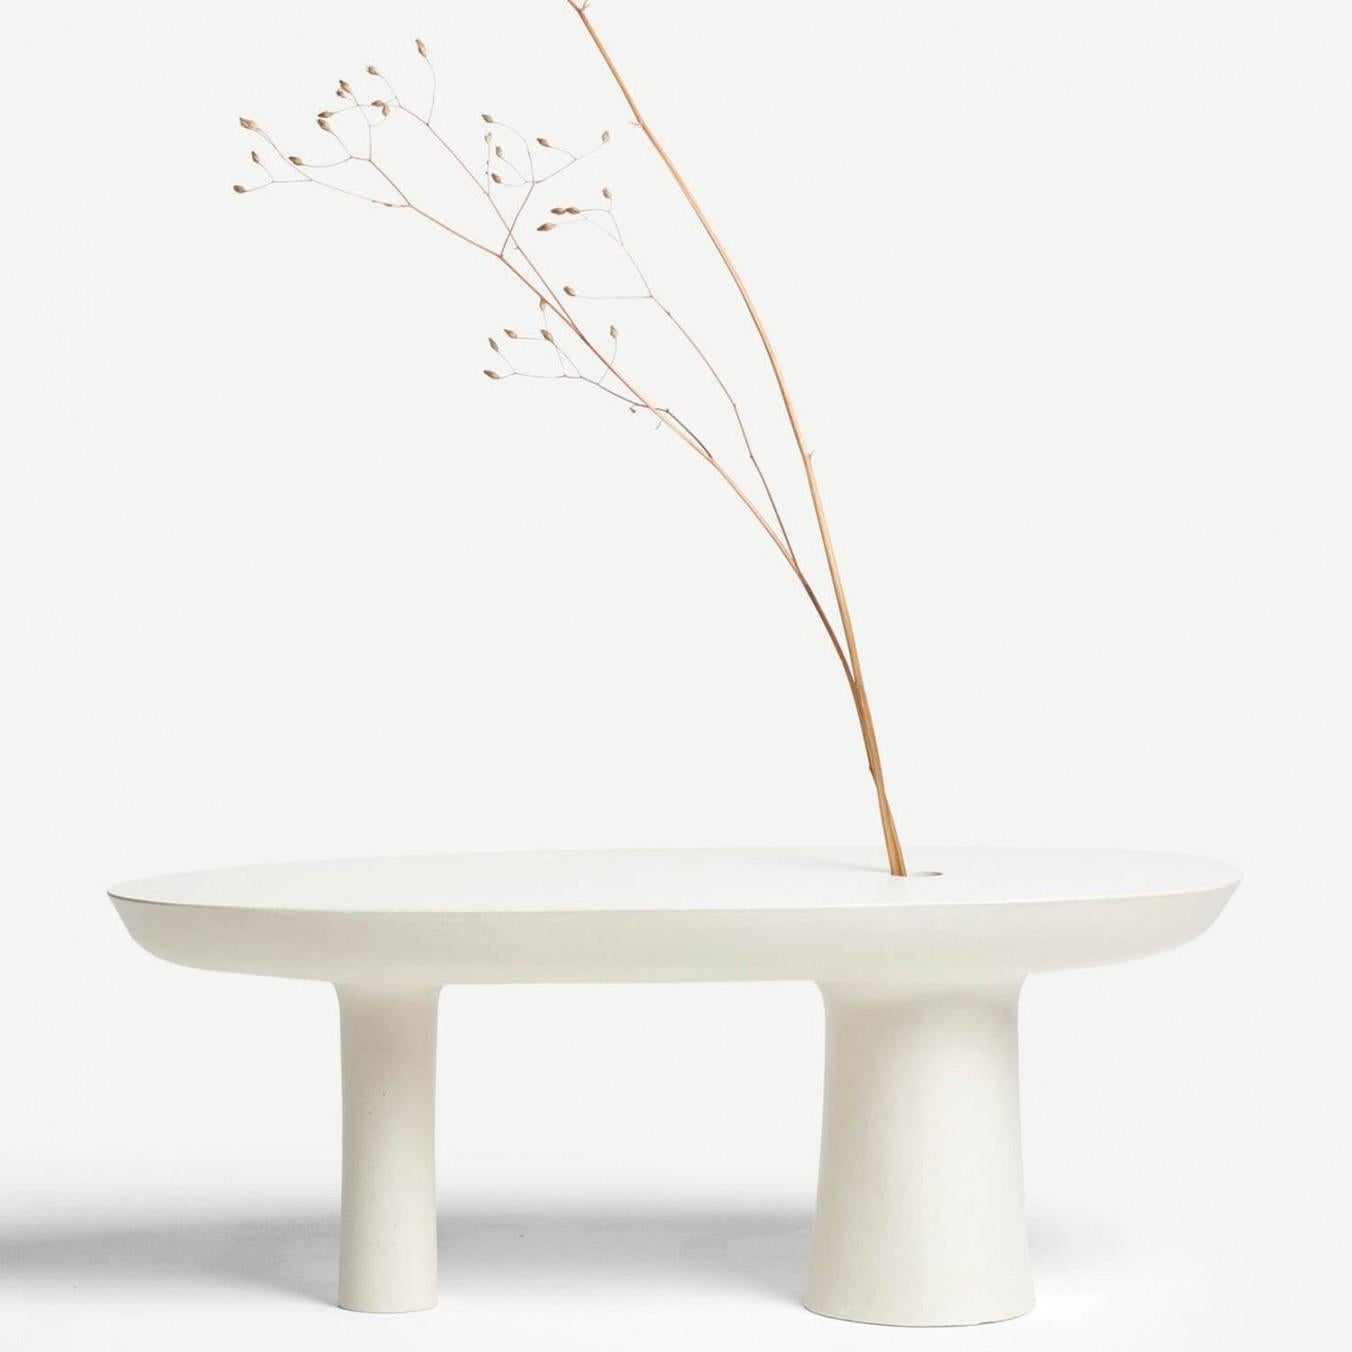 Contemporary white Jesmonite vase - stem vase by Malgorzata Bany

Drawing direct inspiration from the Japanese art of flower arrangement, ‘Ikebana’, the Stem Vase places emphasis on shape, line, form and the texture of the piece. By accentuating a